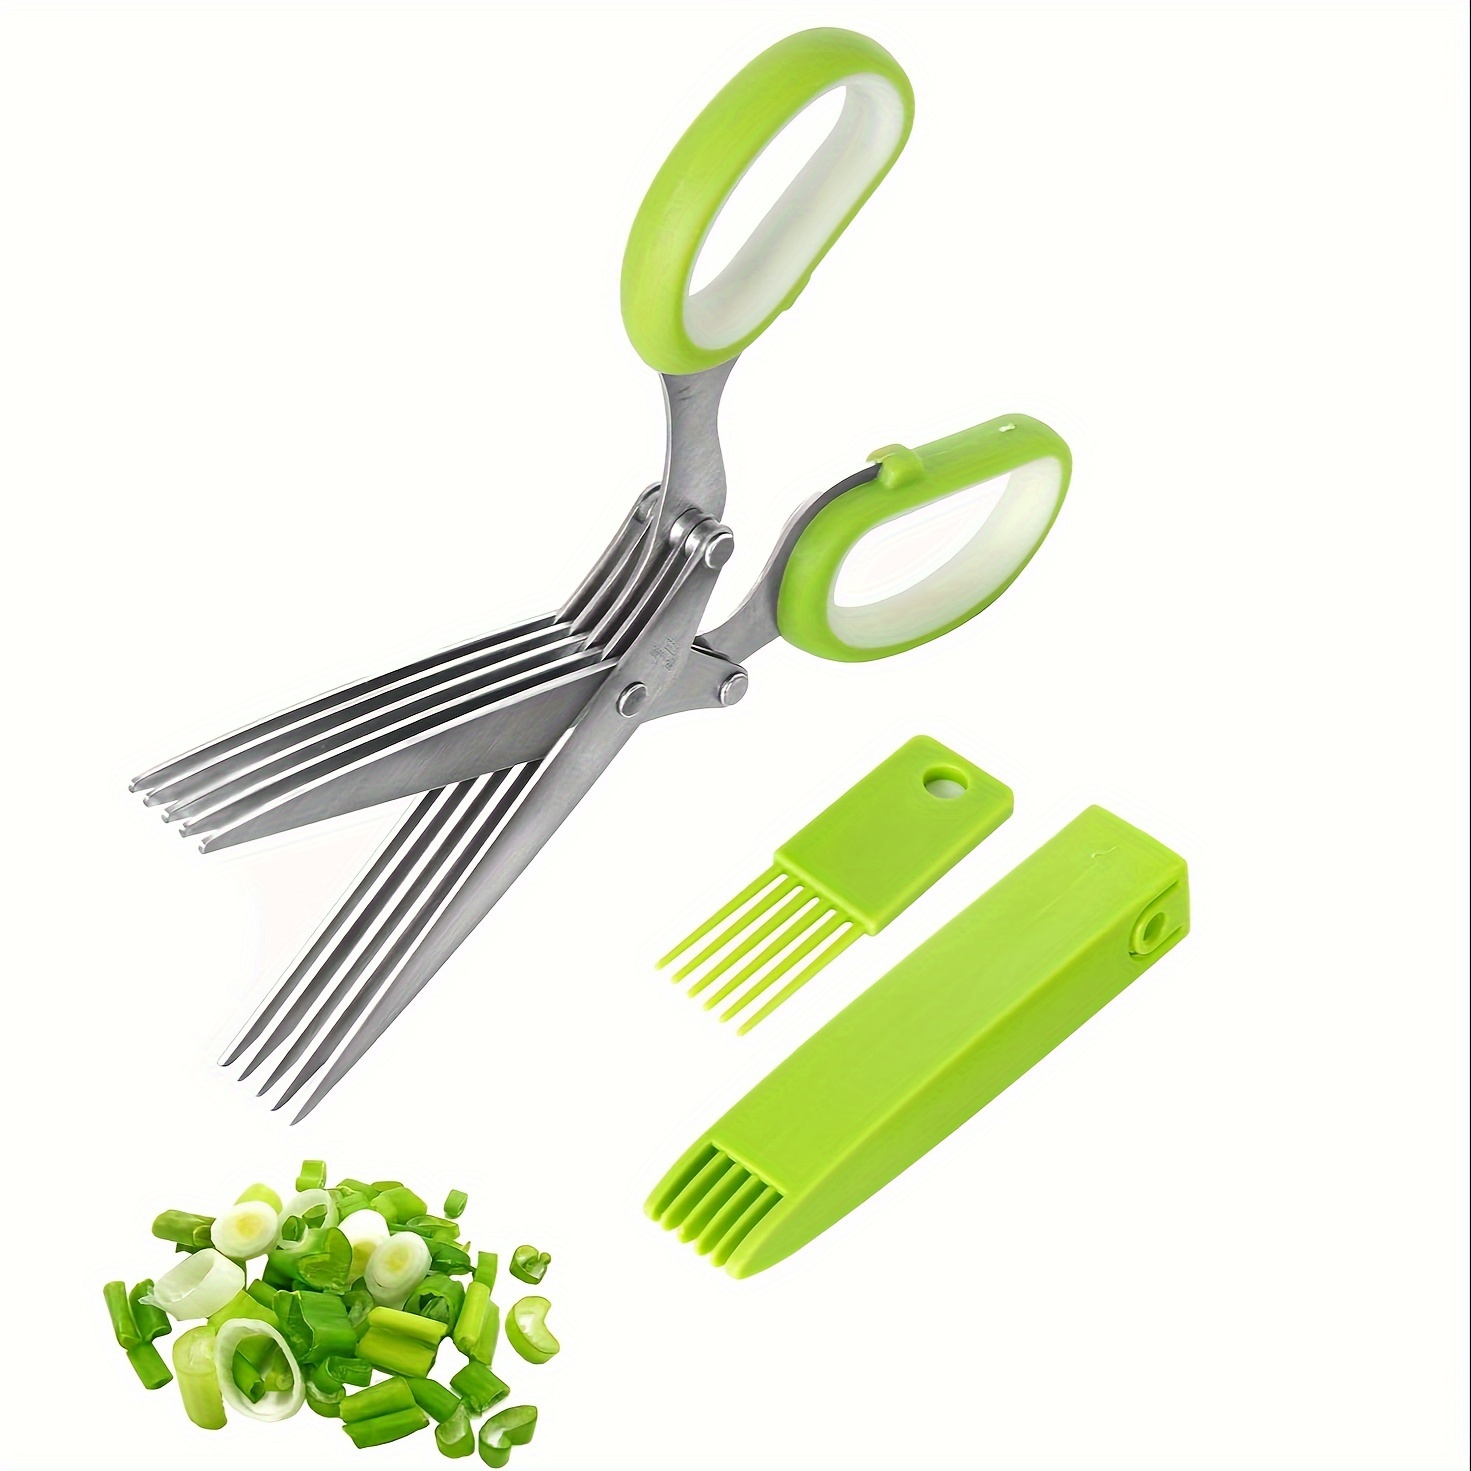 5 Blade Herb Scissors Set with Cover - Silver